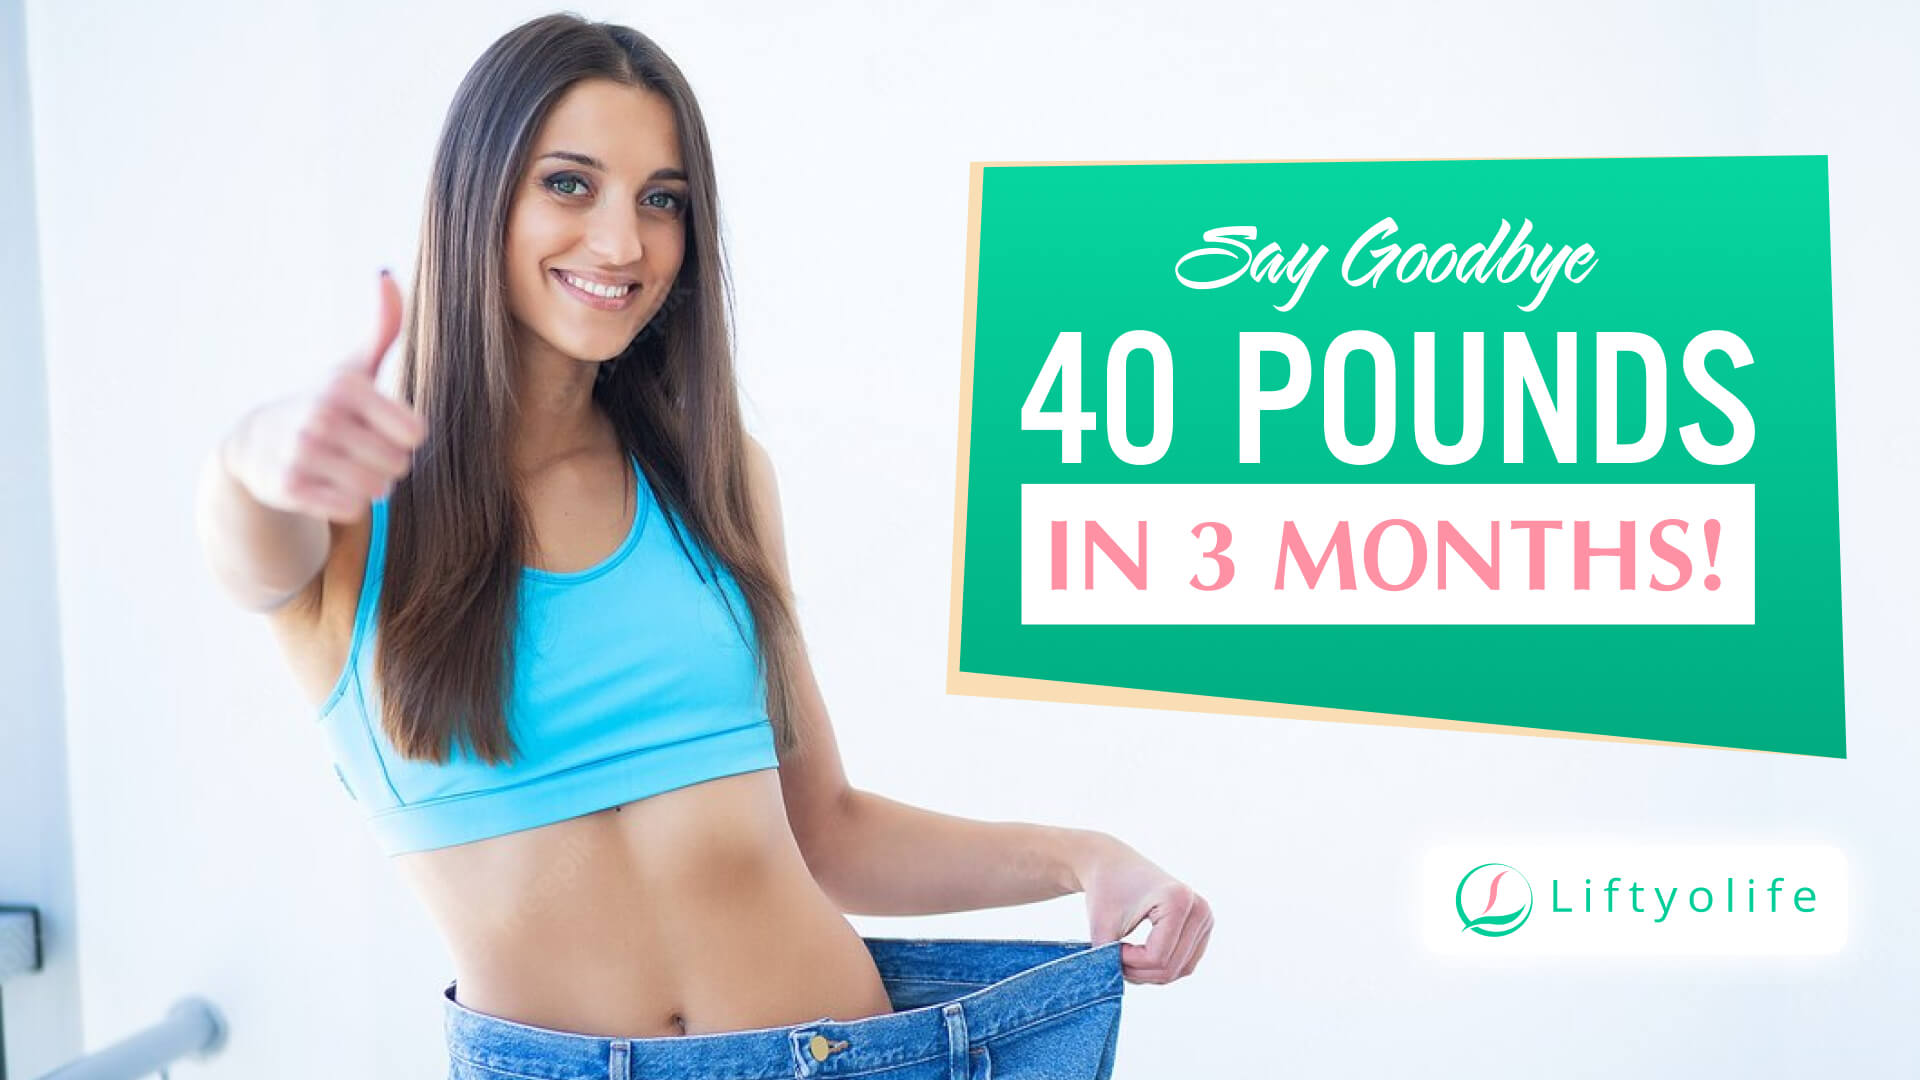 How To Lose 40 Pounds In 3 Months?